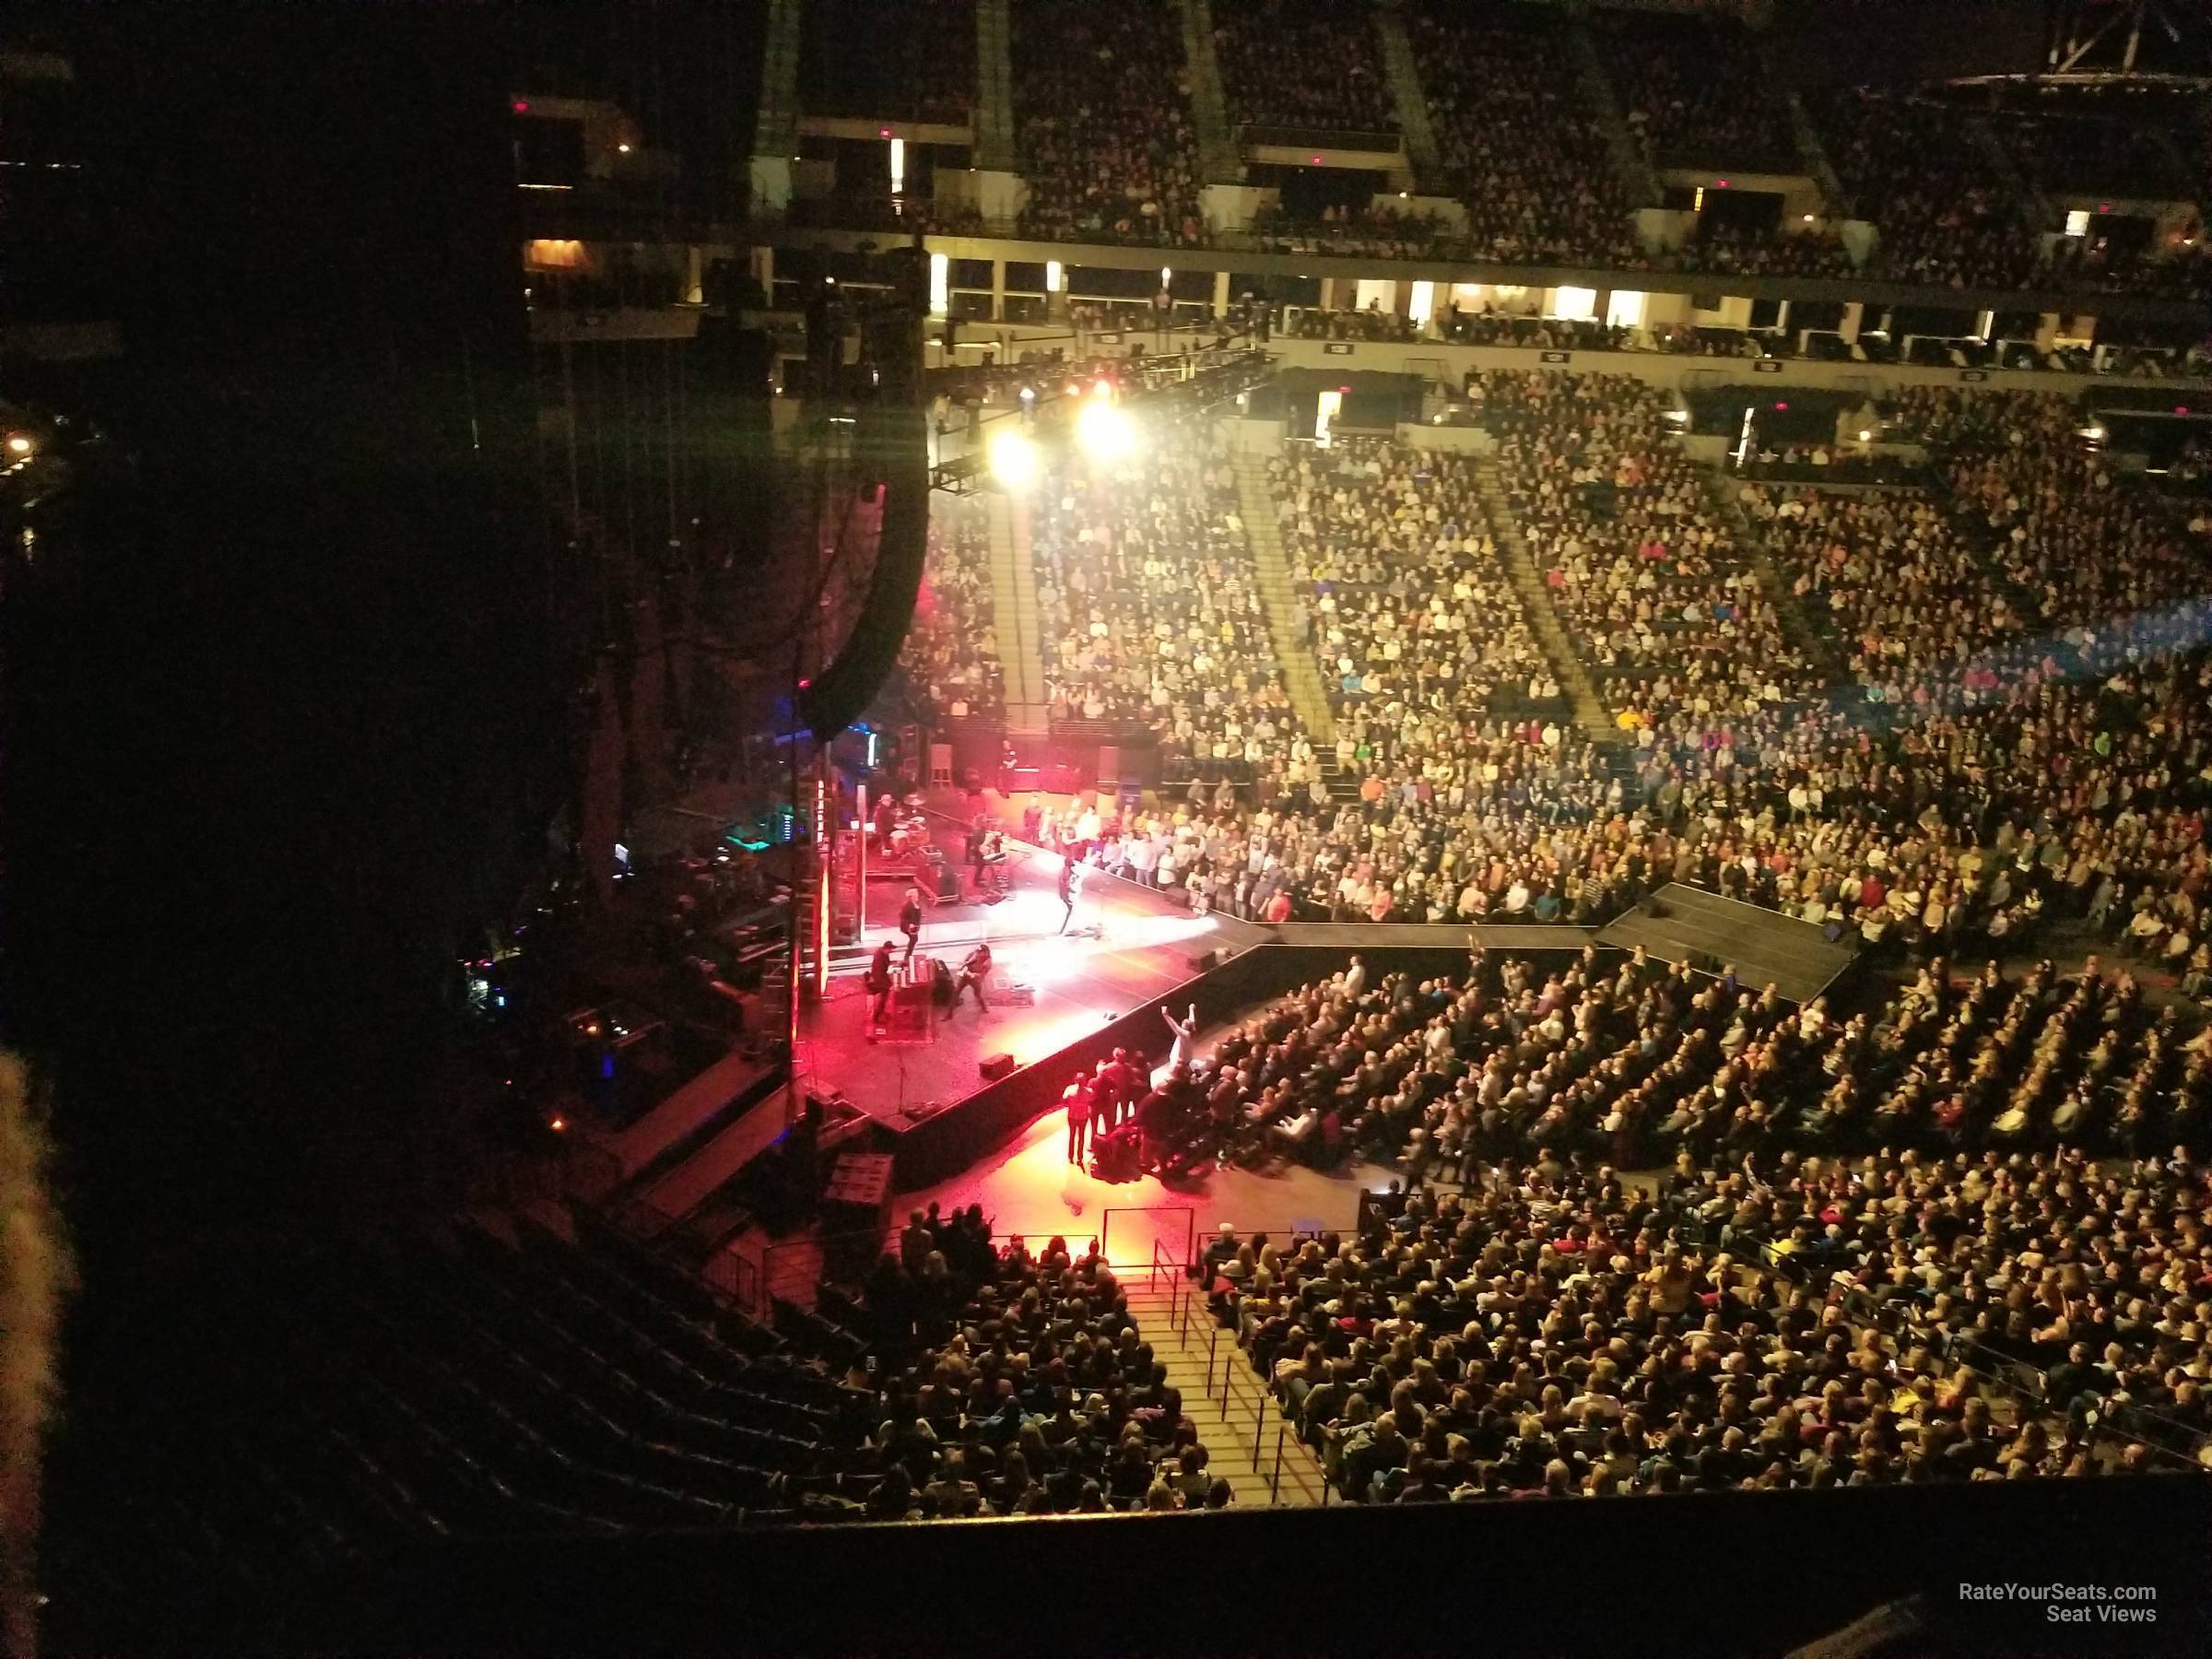 section 214, row c seat view  for concert - target center